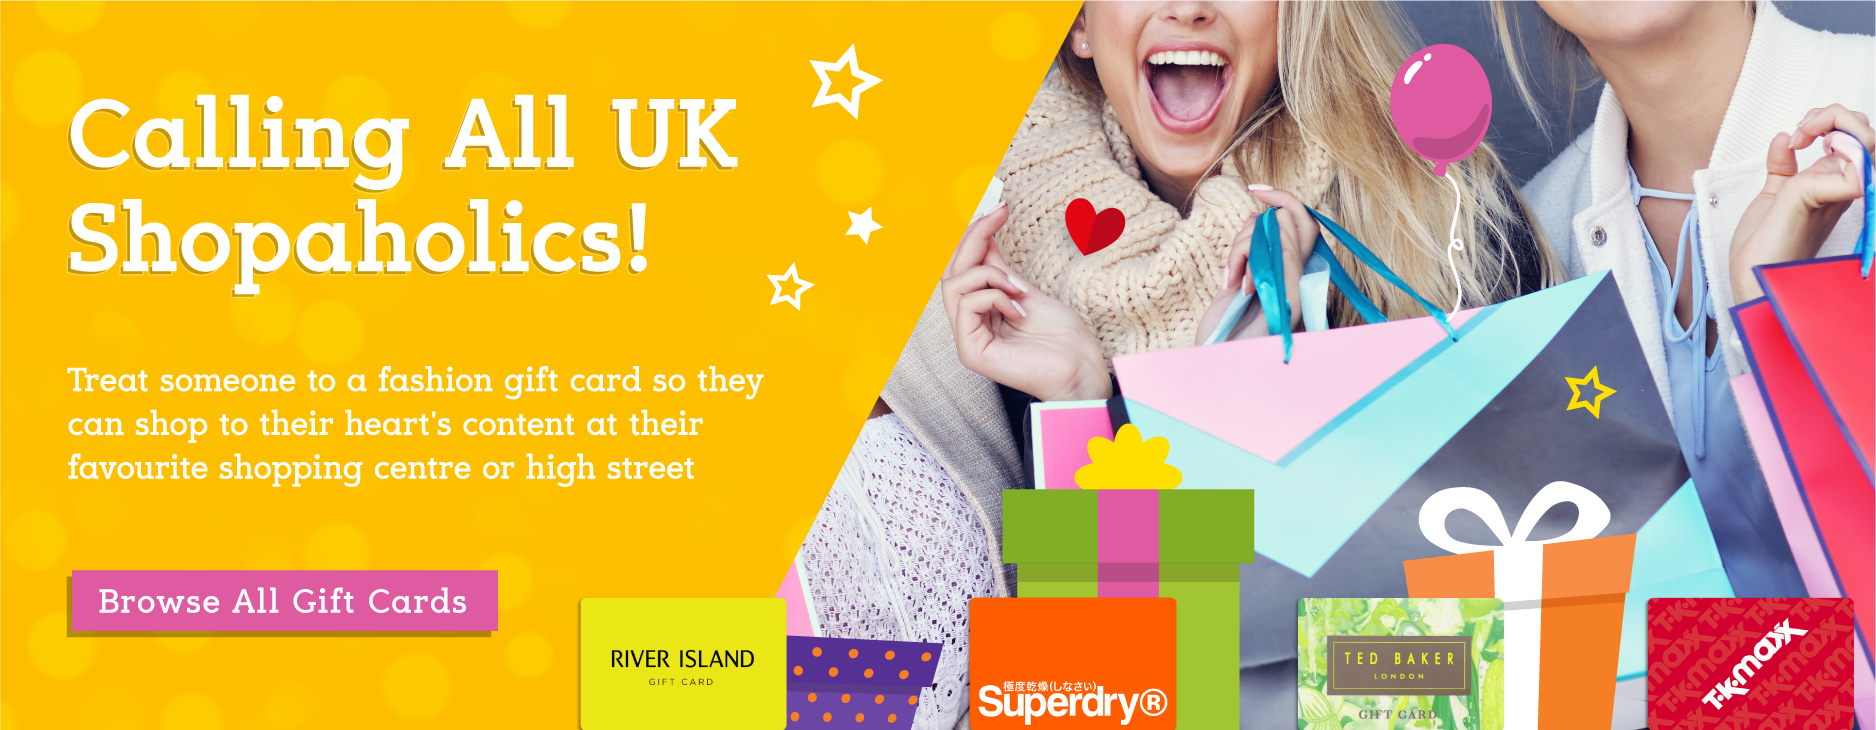 Buy River Island Gift Cards & Vouchers